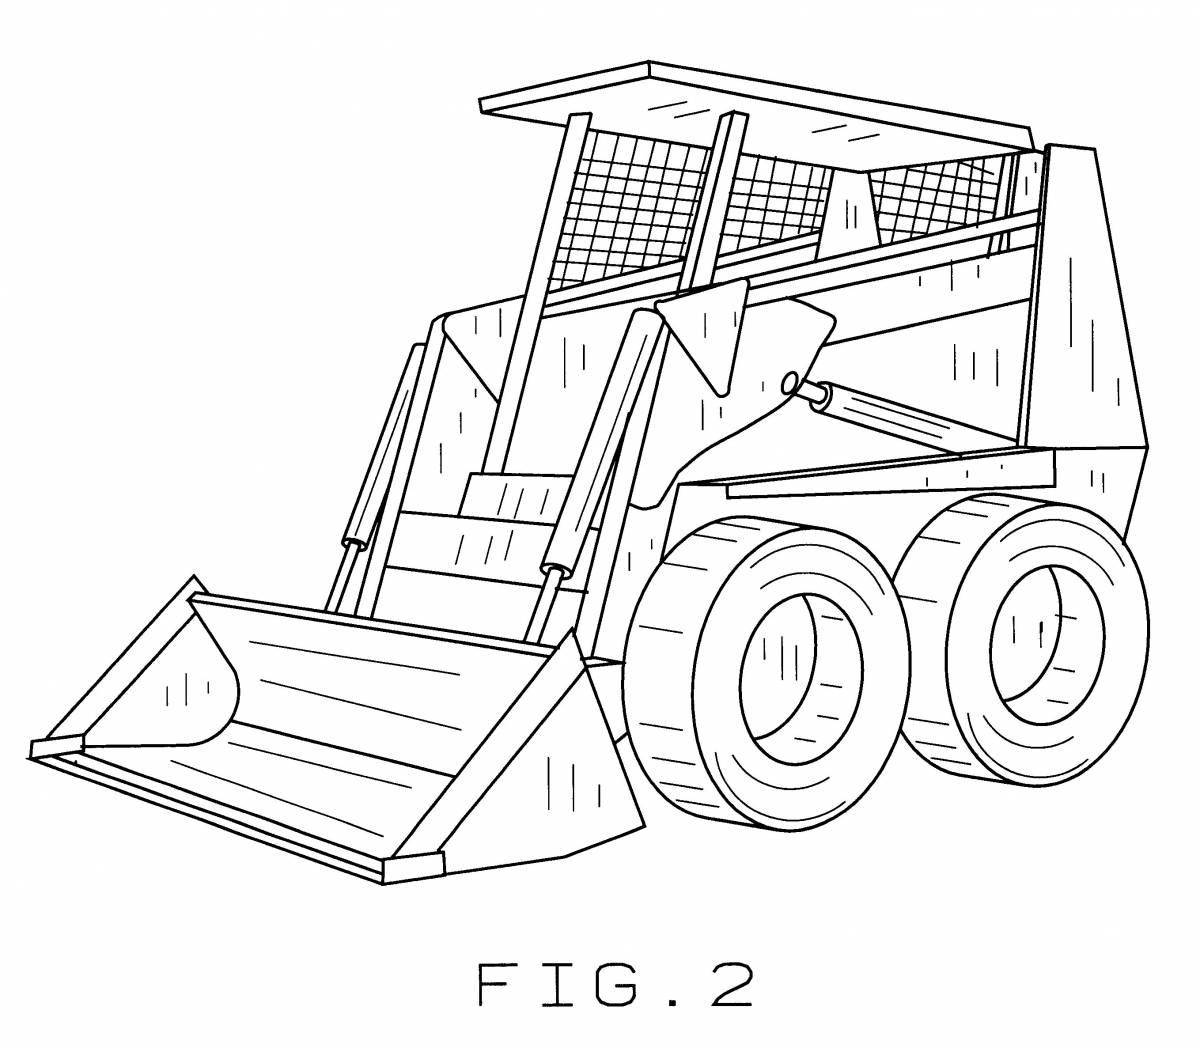 Fun forklift coloring book for 3-4 year olds